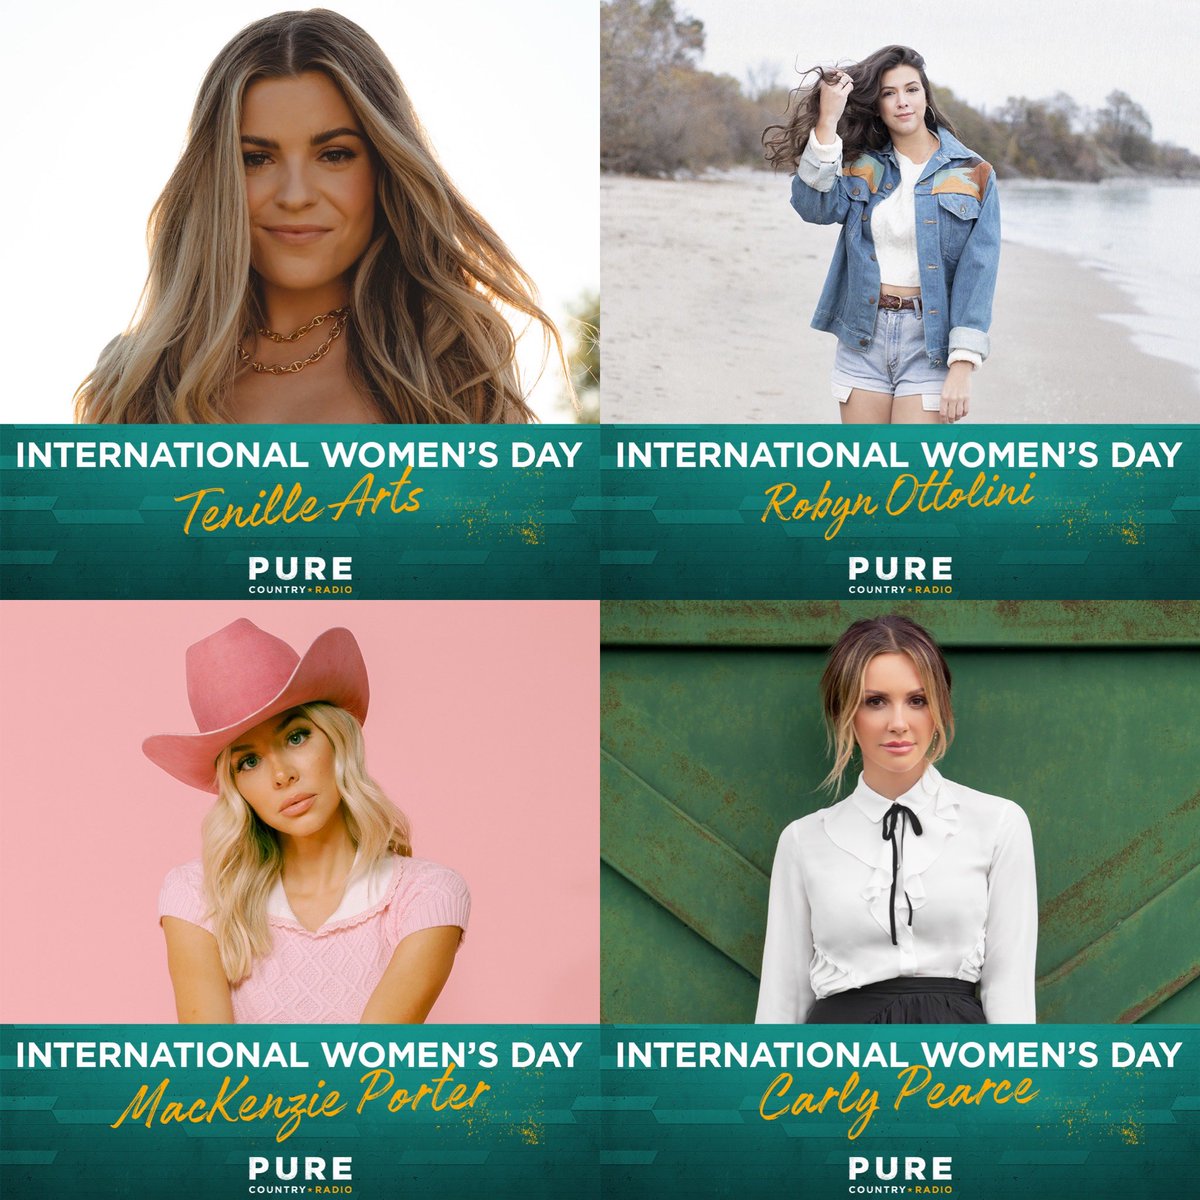 Celebrating #InternationalWomensDay with 4️⃣ incredibly talented #WomenInCountry co-hosting my show on Pure Country! 💗🎶 

@carlypearce @MacKenziePMusic @TenilleArts & @RobynOttolini thanks for joining me, now let’s play some jams!!! 🙌🎶

Tune in here! iheartradio.ca/purecountry/